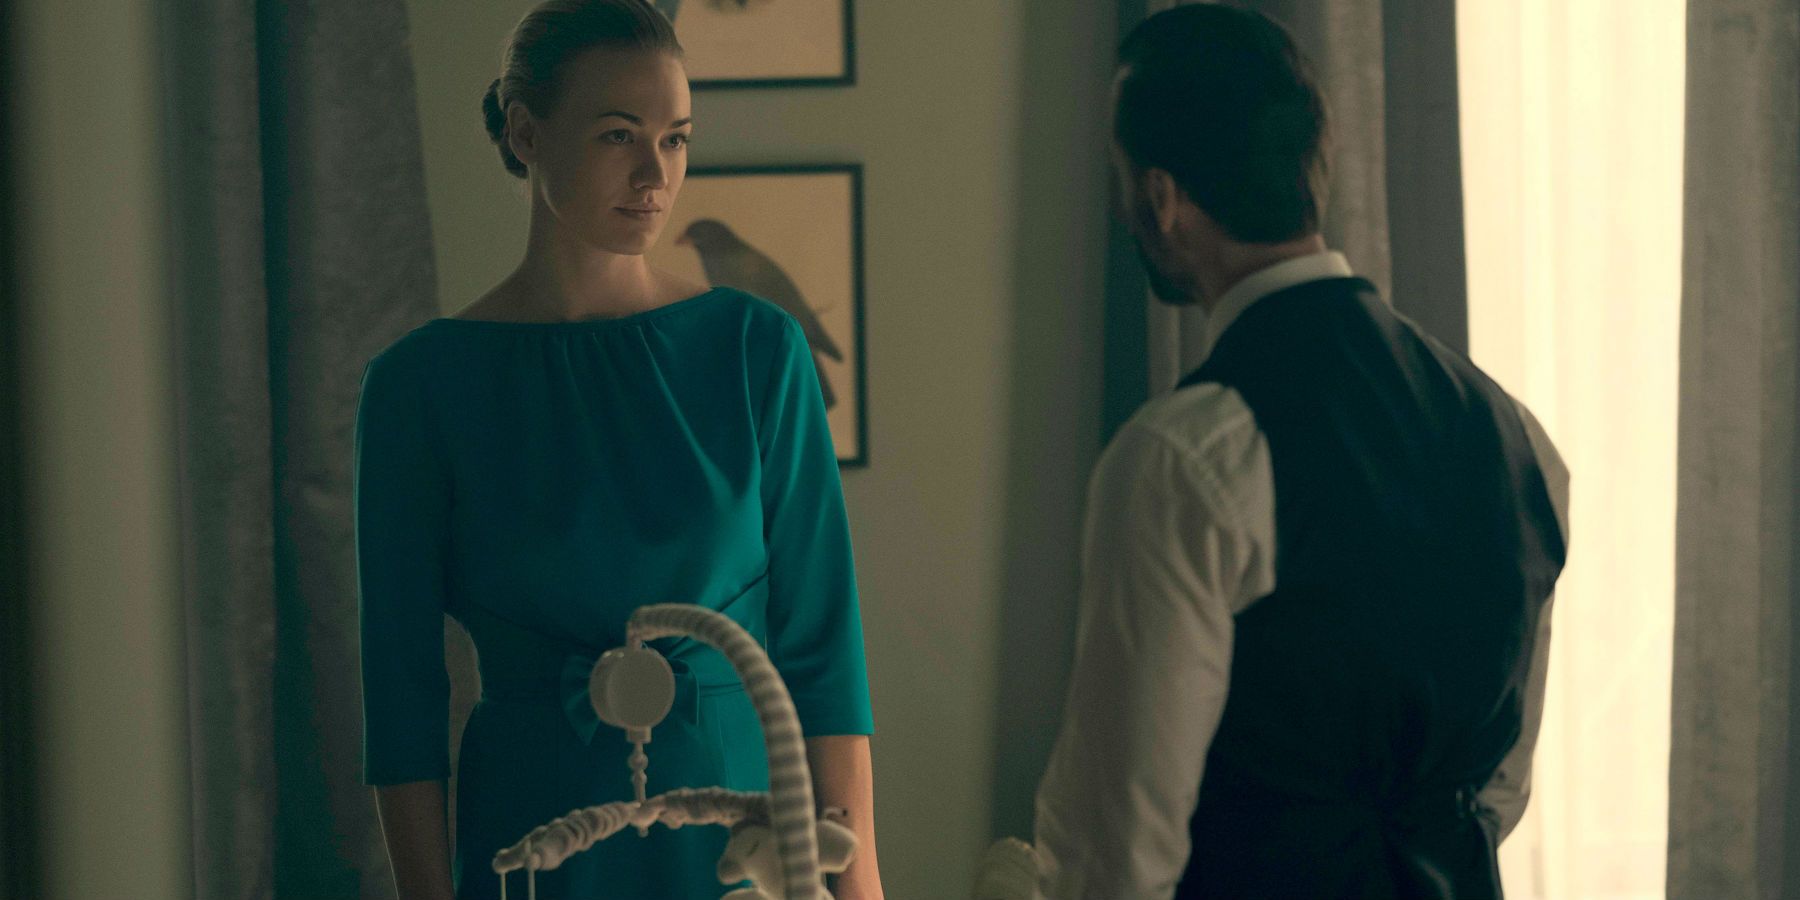 Handmaids Tale - Serena and Fred